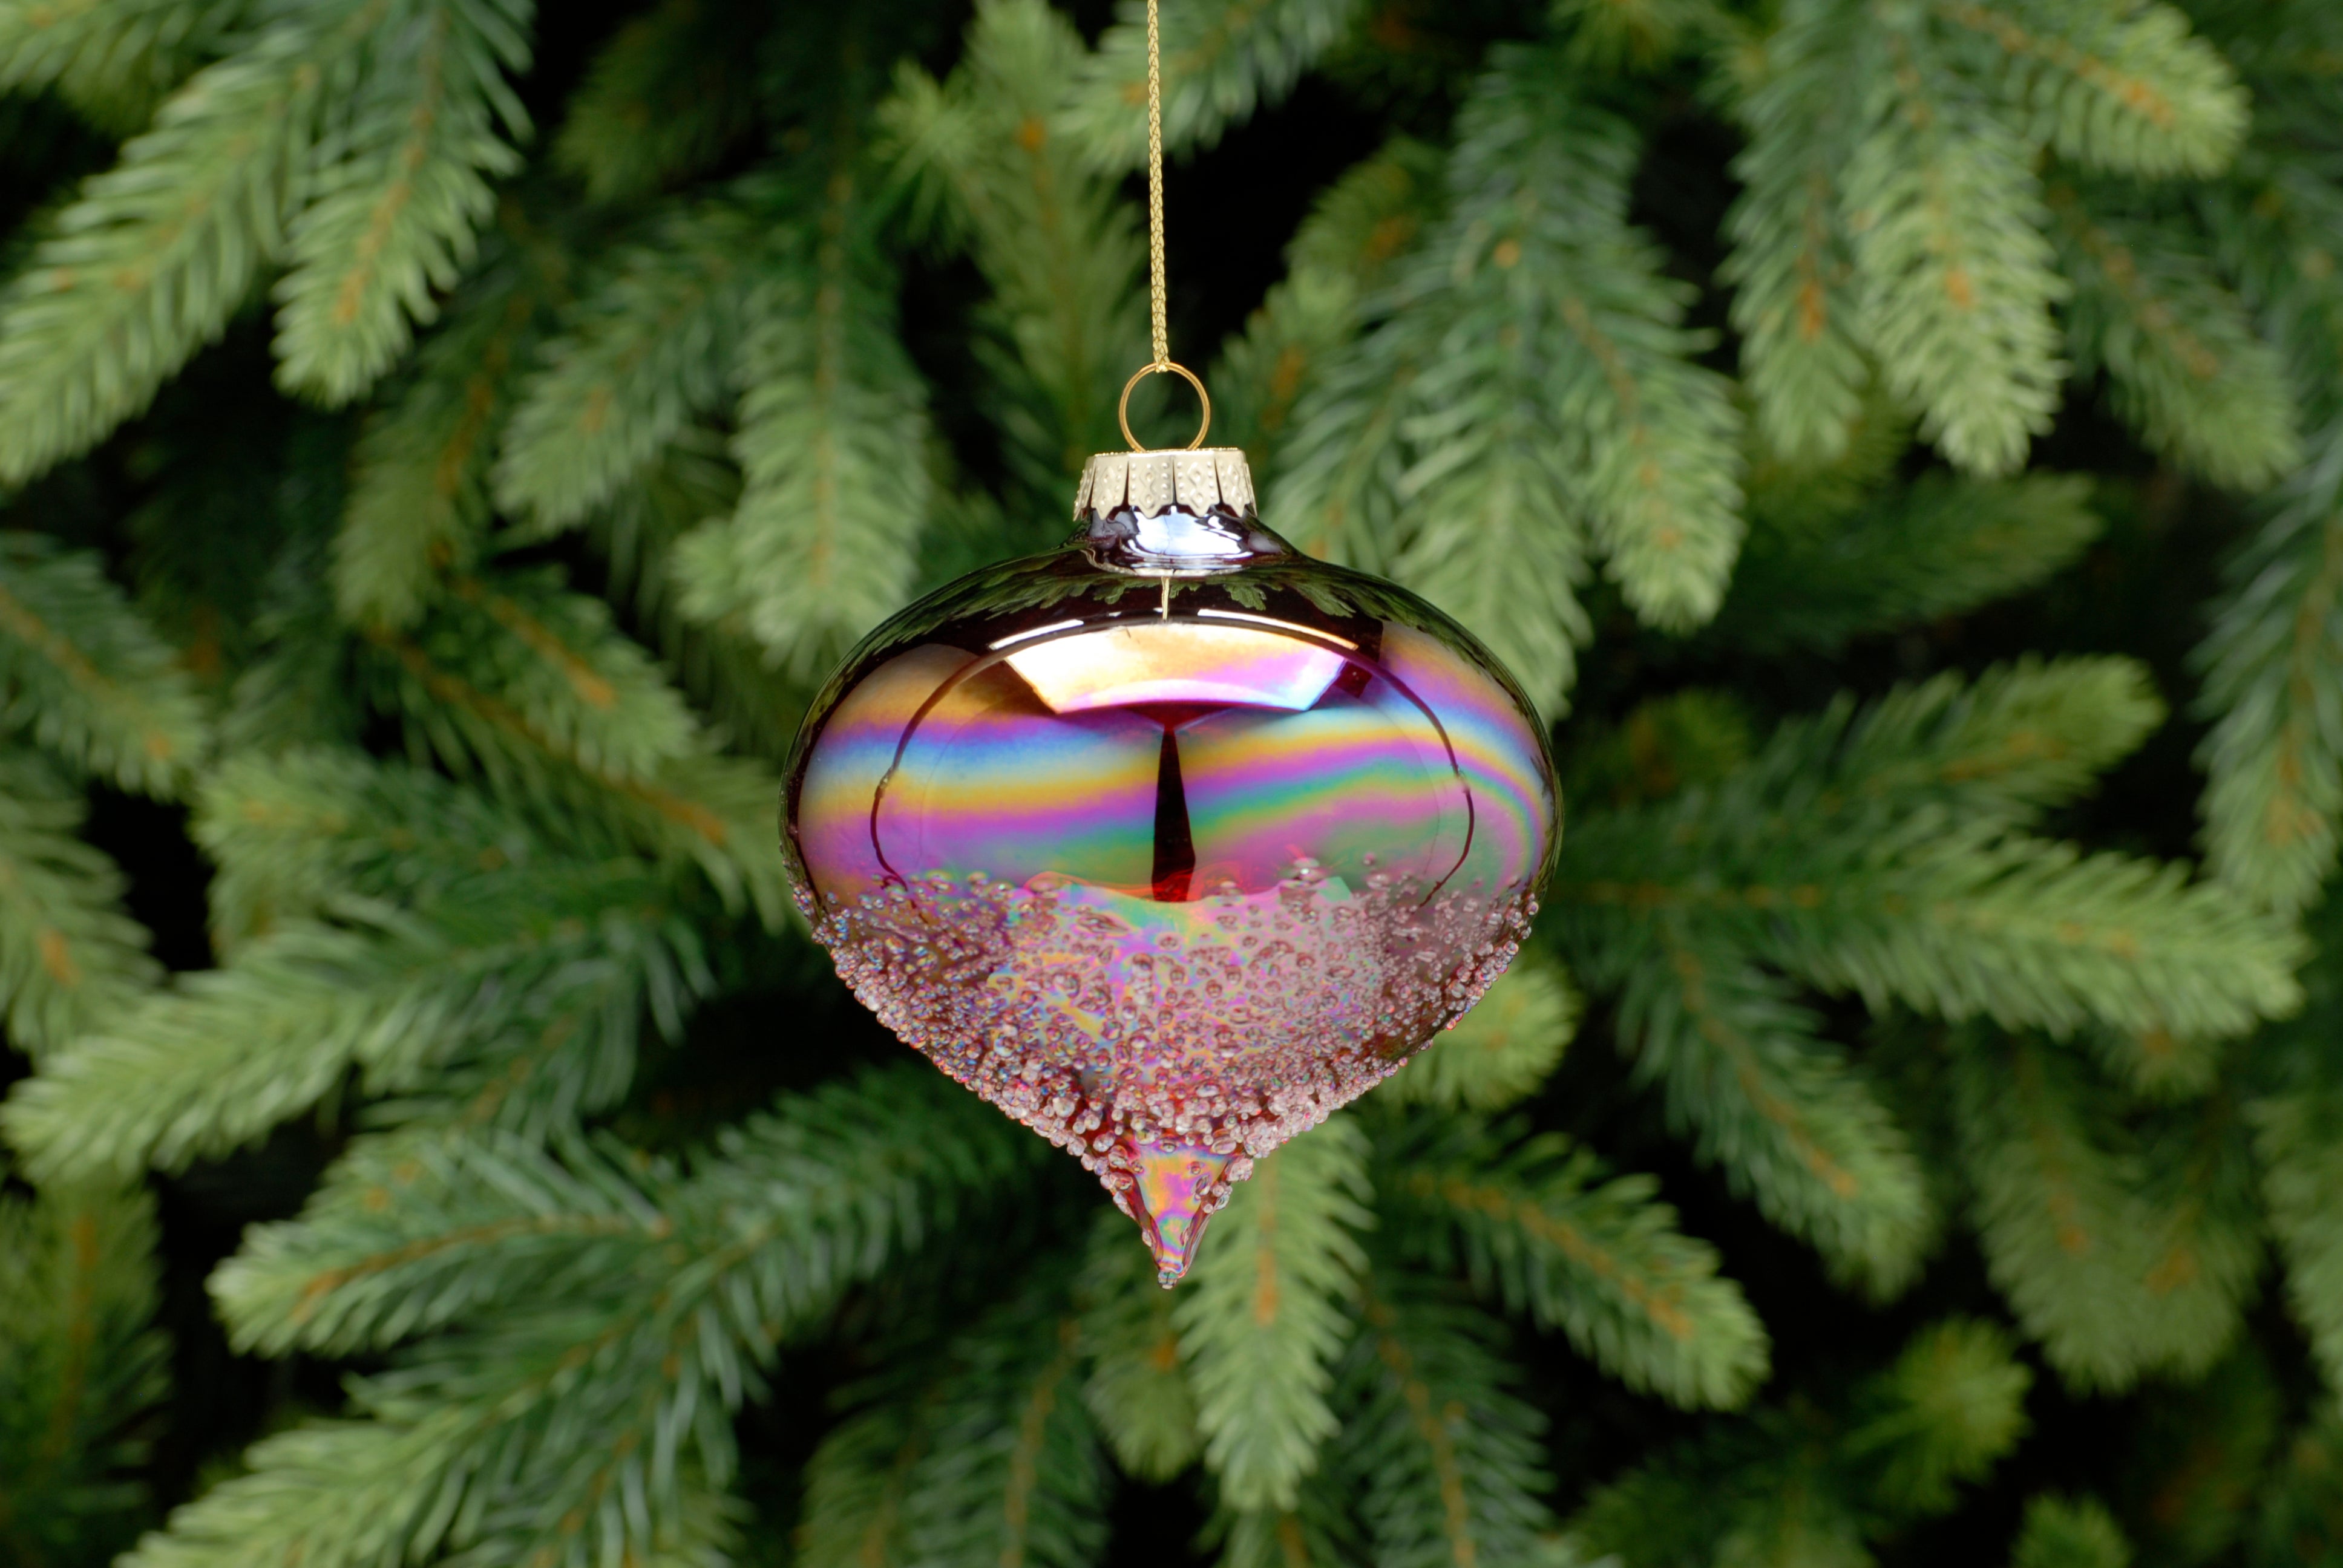 Red Iridescent Crusted Glass Onion Bauble